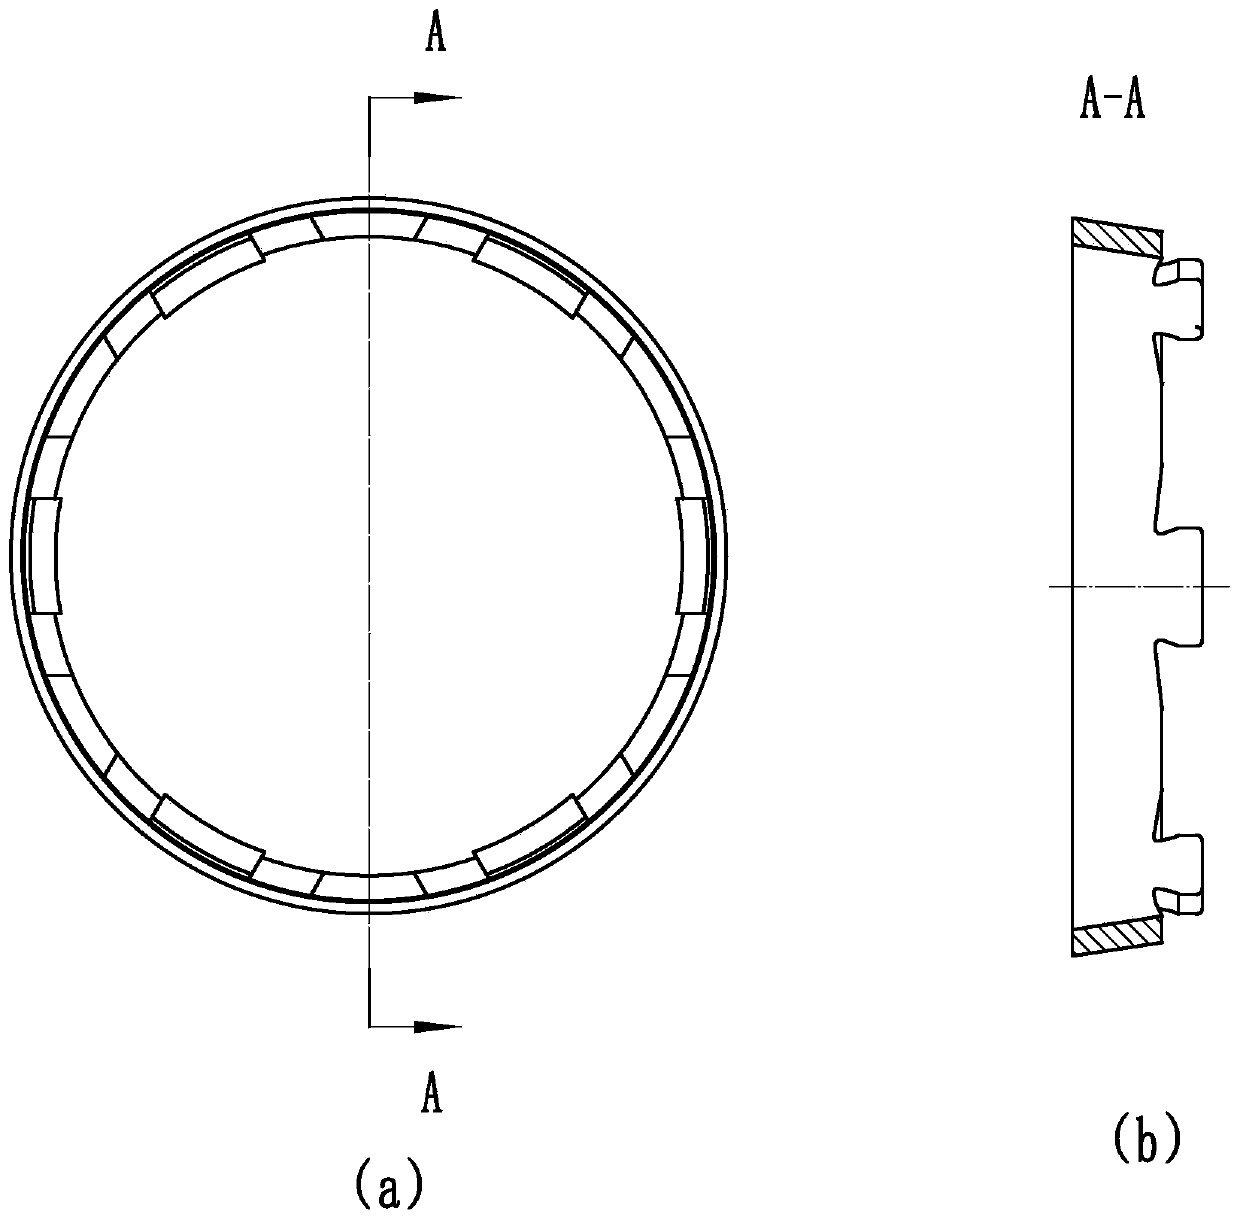 A bonding mold and bonding method for tapered surface friction material of synchronizer inner ring